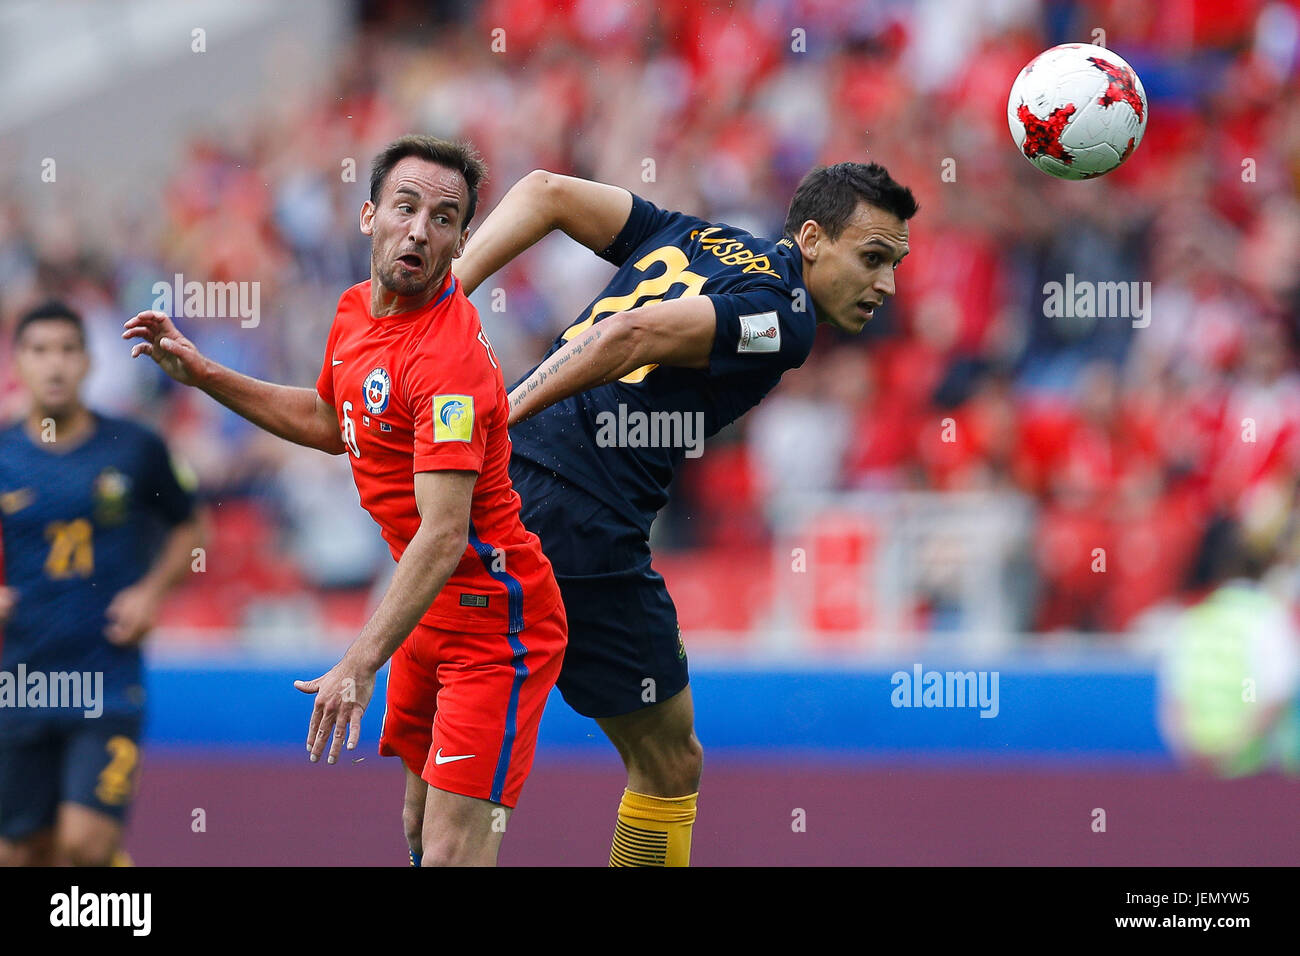 MOSCOU, MO - 25.06.2017: CHILE VS AUSTRALIA - FUENZALIDA Jose of Chile wrangles ball with IRVINE Jackson of Australia during Chile-Australia match valid for the third round of the 2017 Confederations Cup on Sunday (25th) held at the Spartak Stadium (Otkrytie Arena) in Moscow, Russia. (Photo: Marcelo Machado de Melo/Fotoarena) Stock Photo